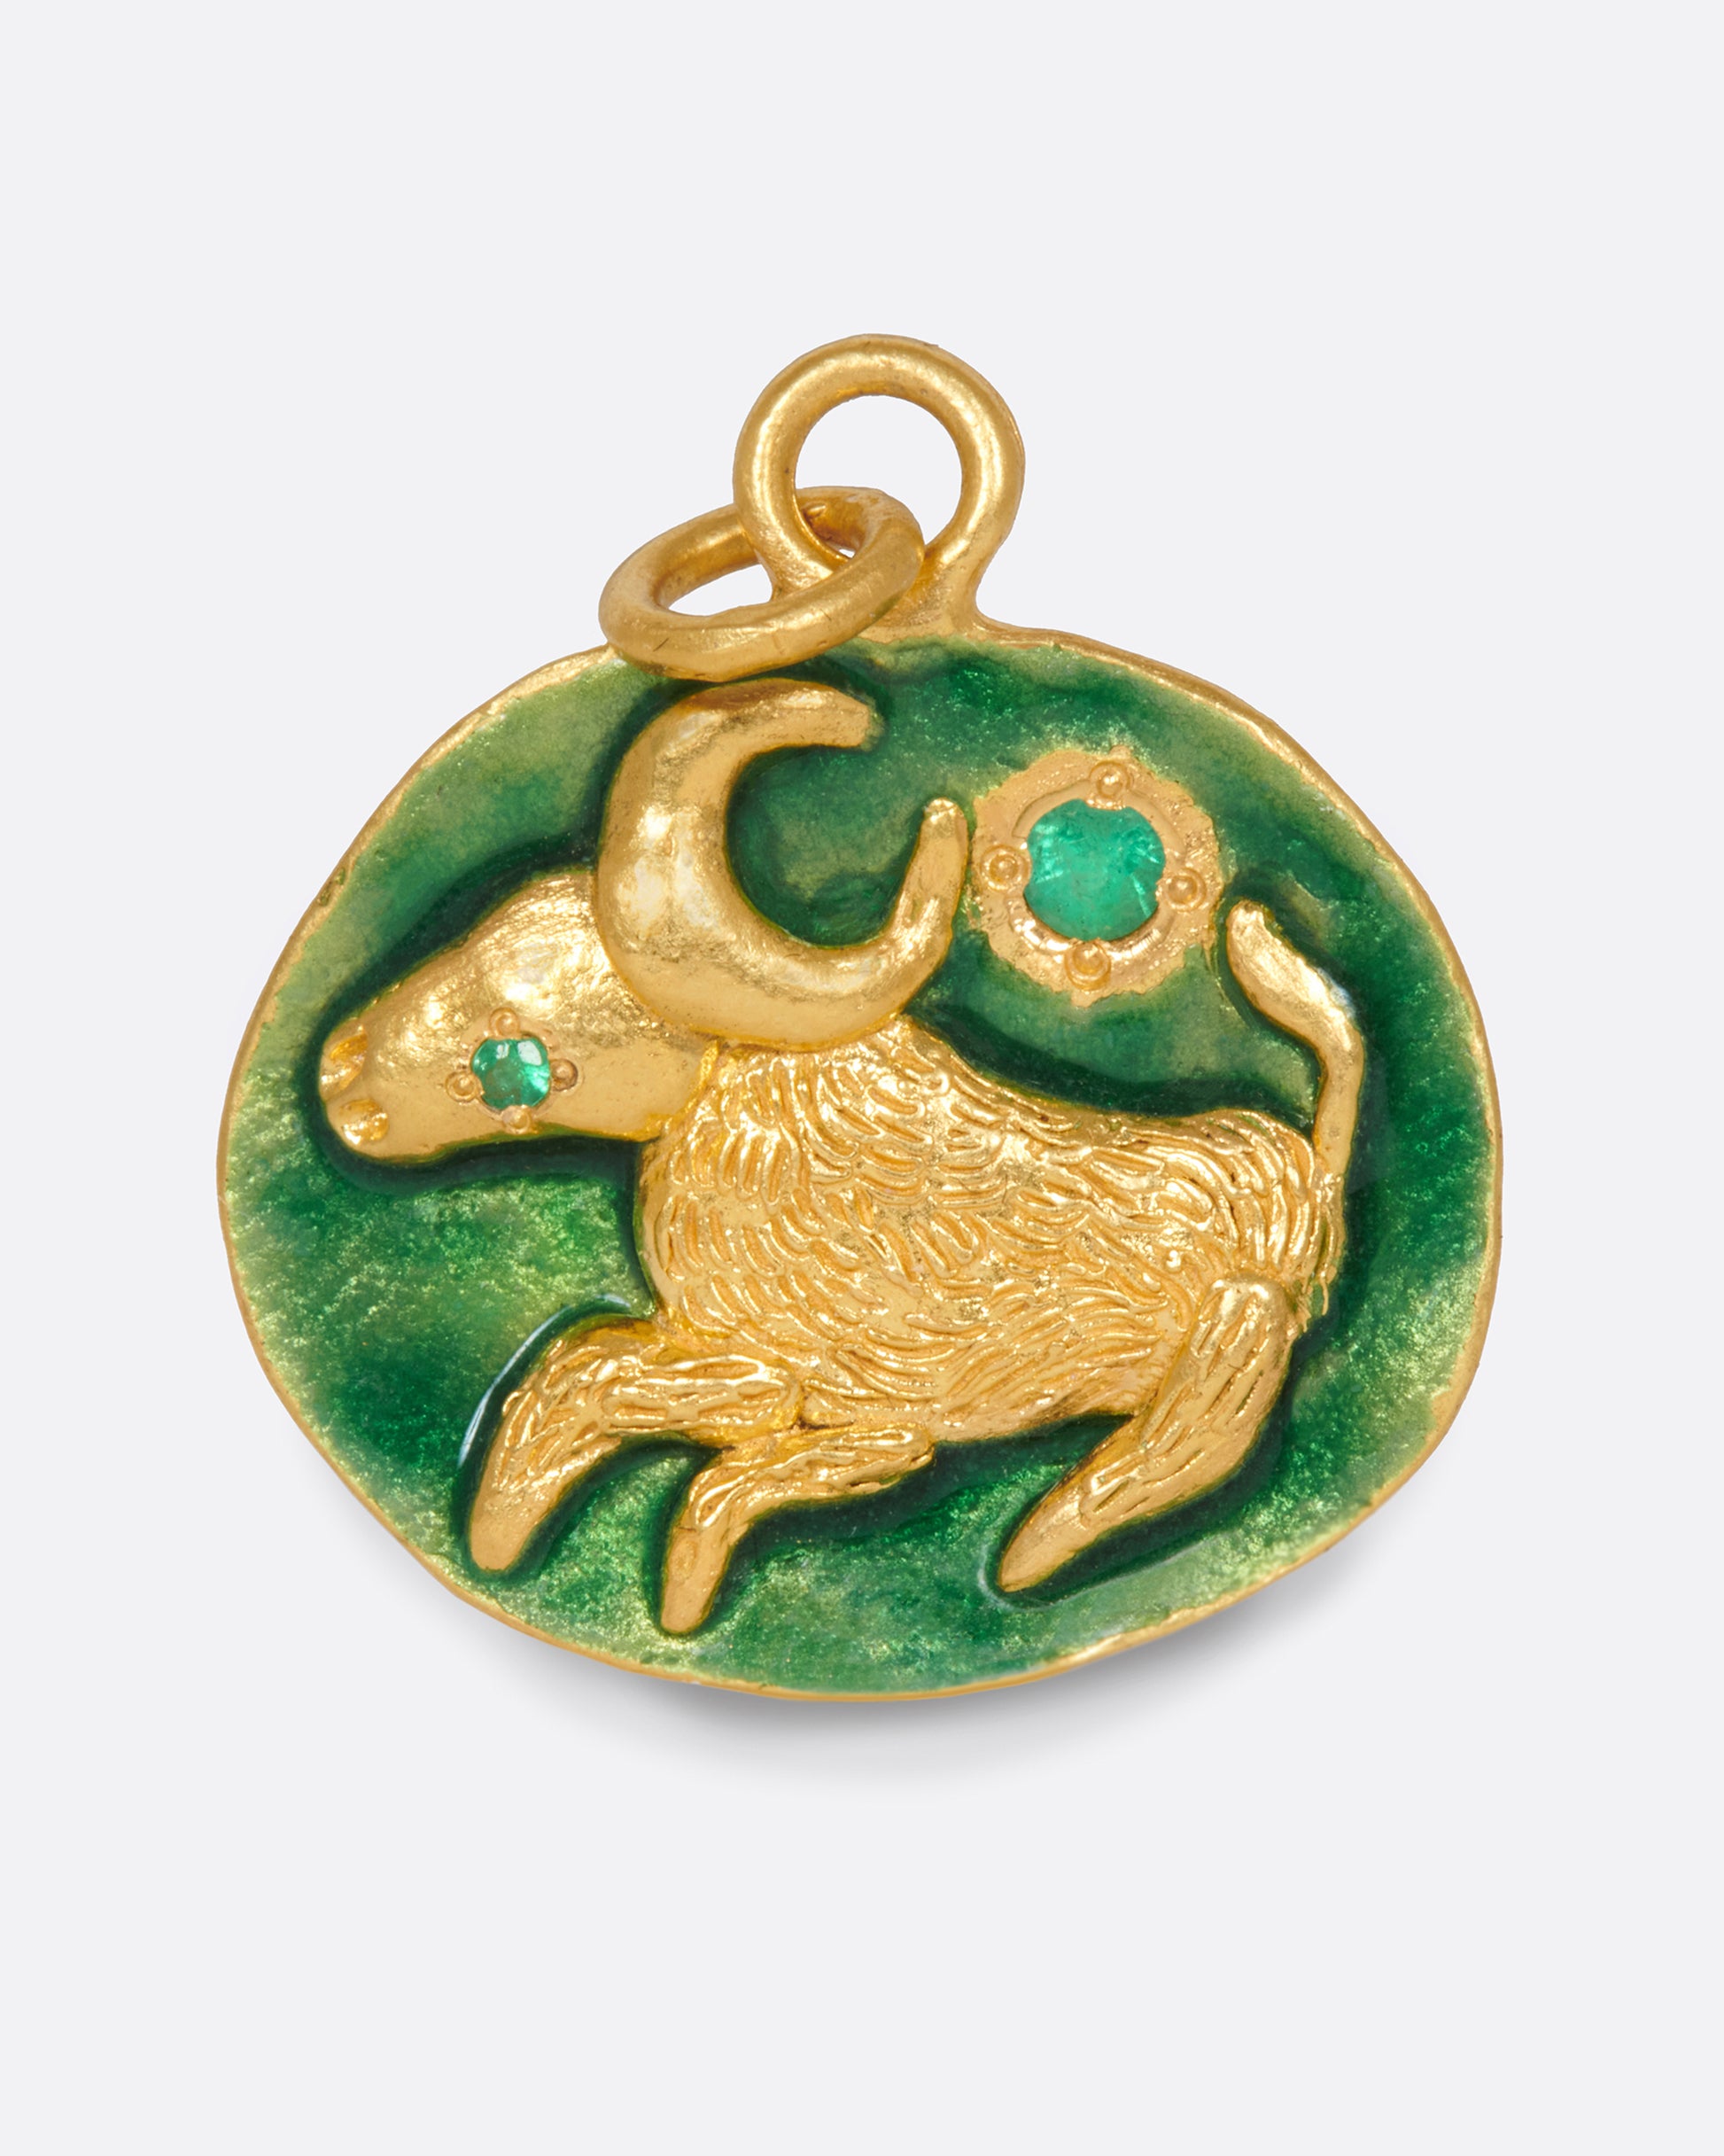 A slightly asymmetrical, circular pendant with a Taurus bull and emerald accents.